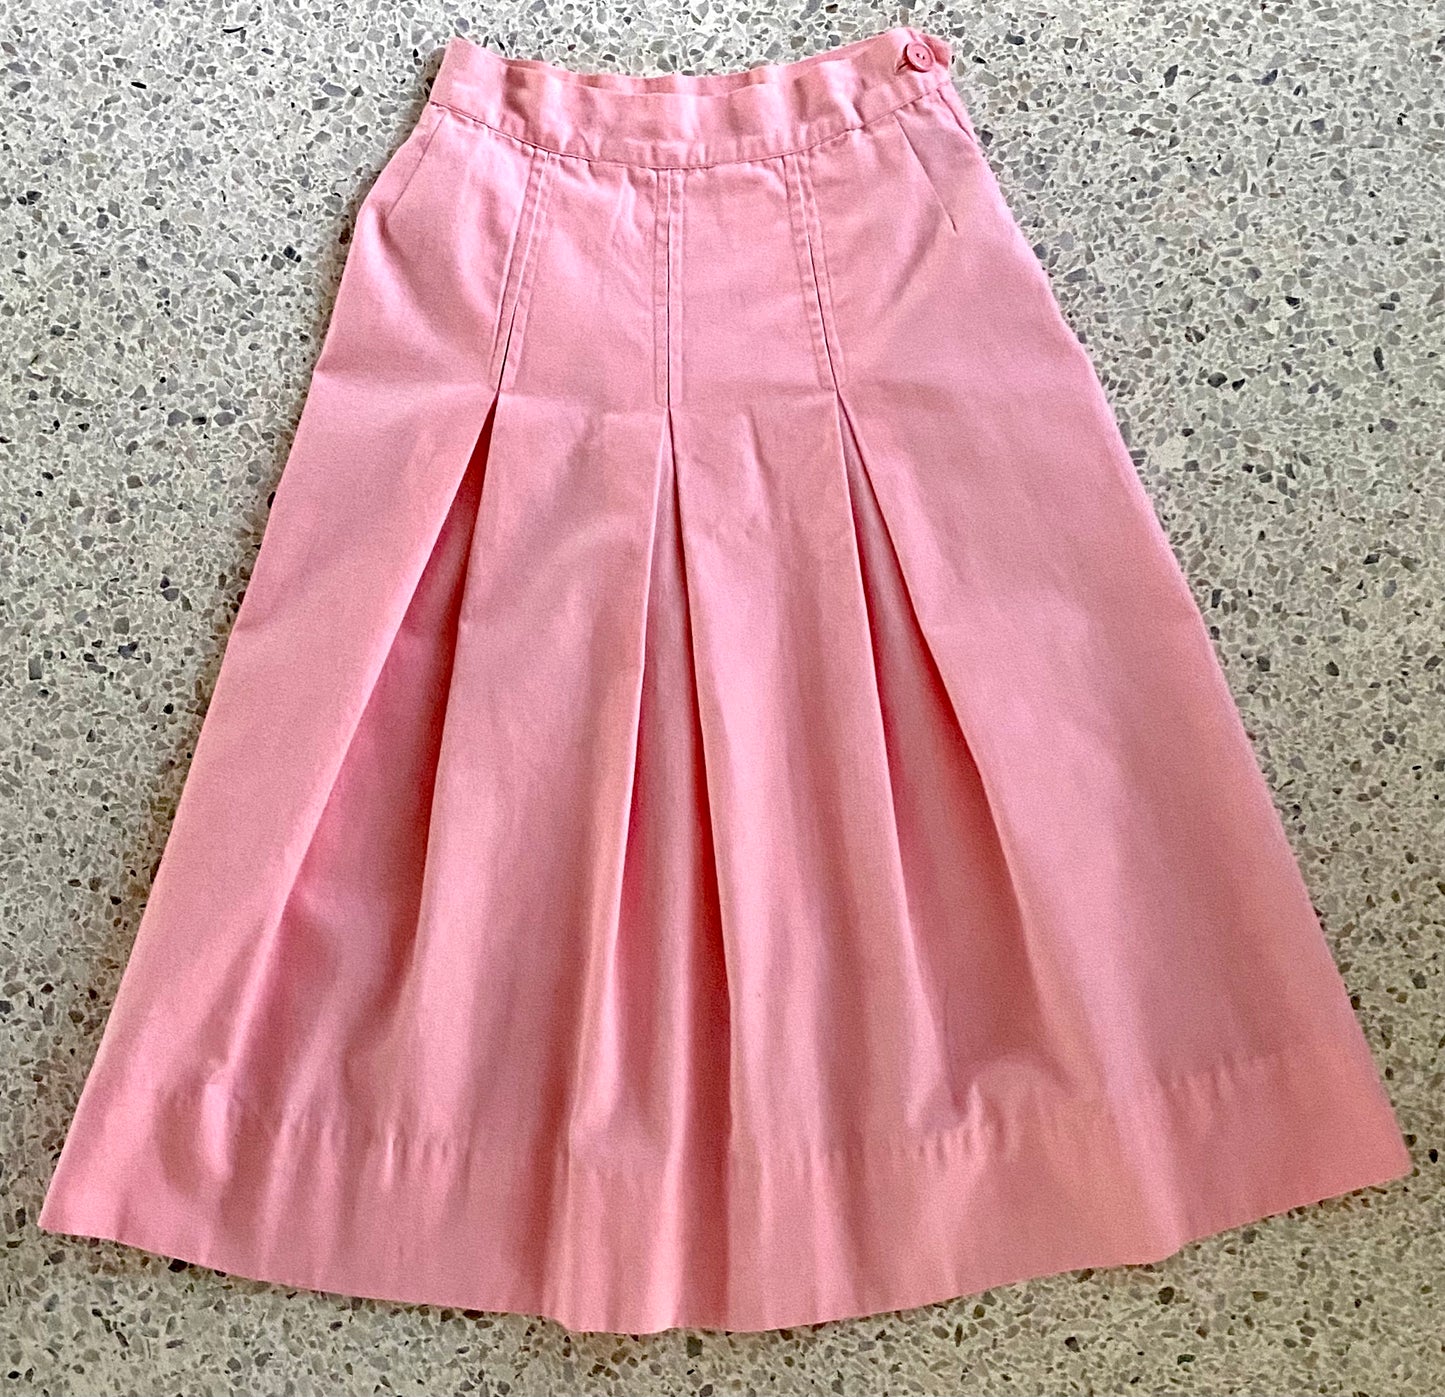 Late 50s/ Early 60s Inverted Box Pleat Skirt